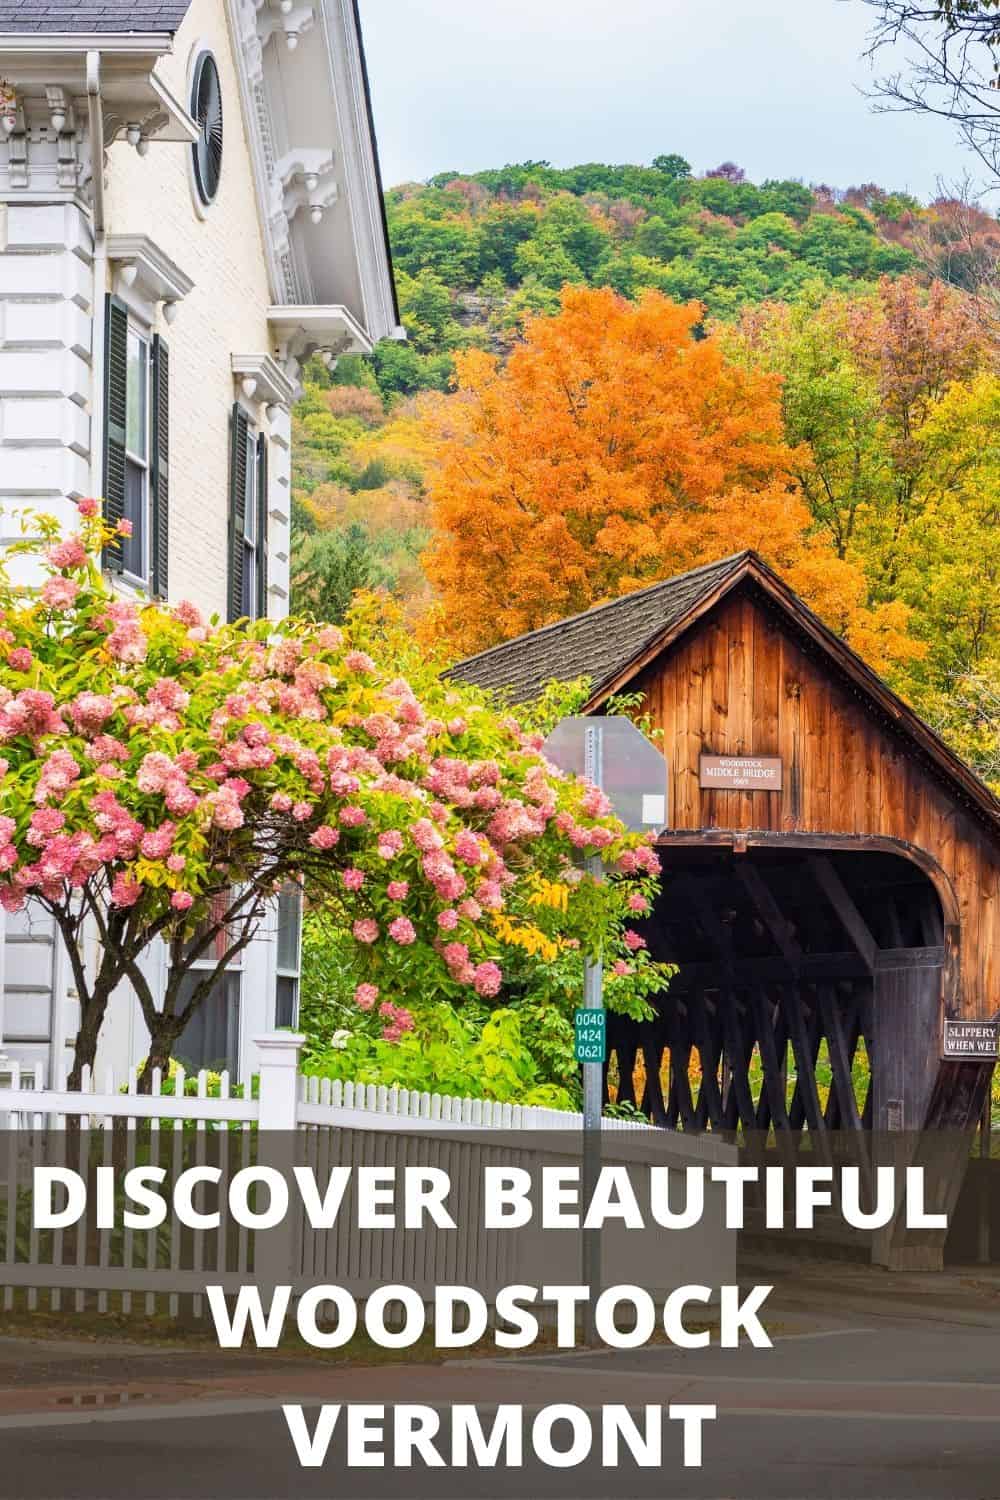 Explore the beauty of Woodstock, Vermont & the timeless elegance of the Woodstock Inn. Falcons, food, comfort, iconic covered bridges, & more. #TravelVermont #WoodstockVermont 